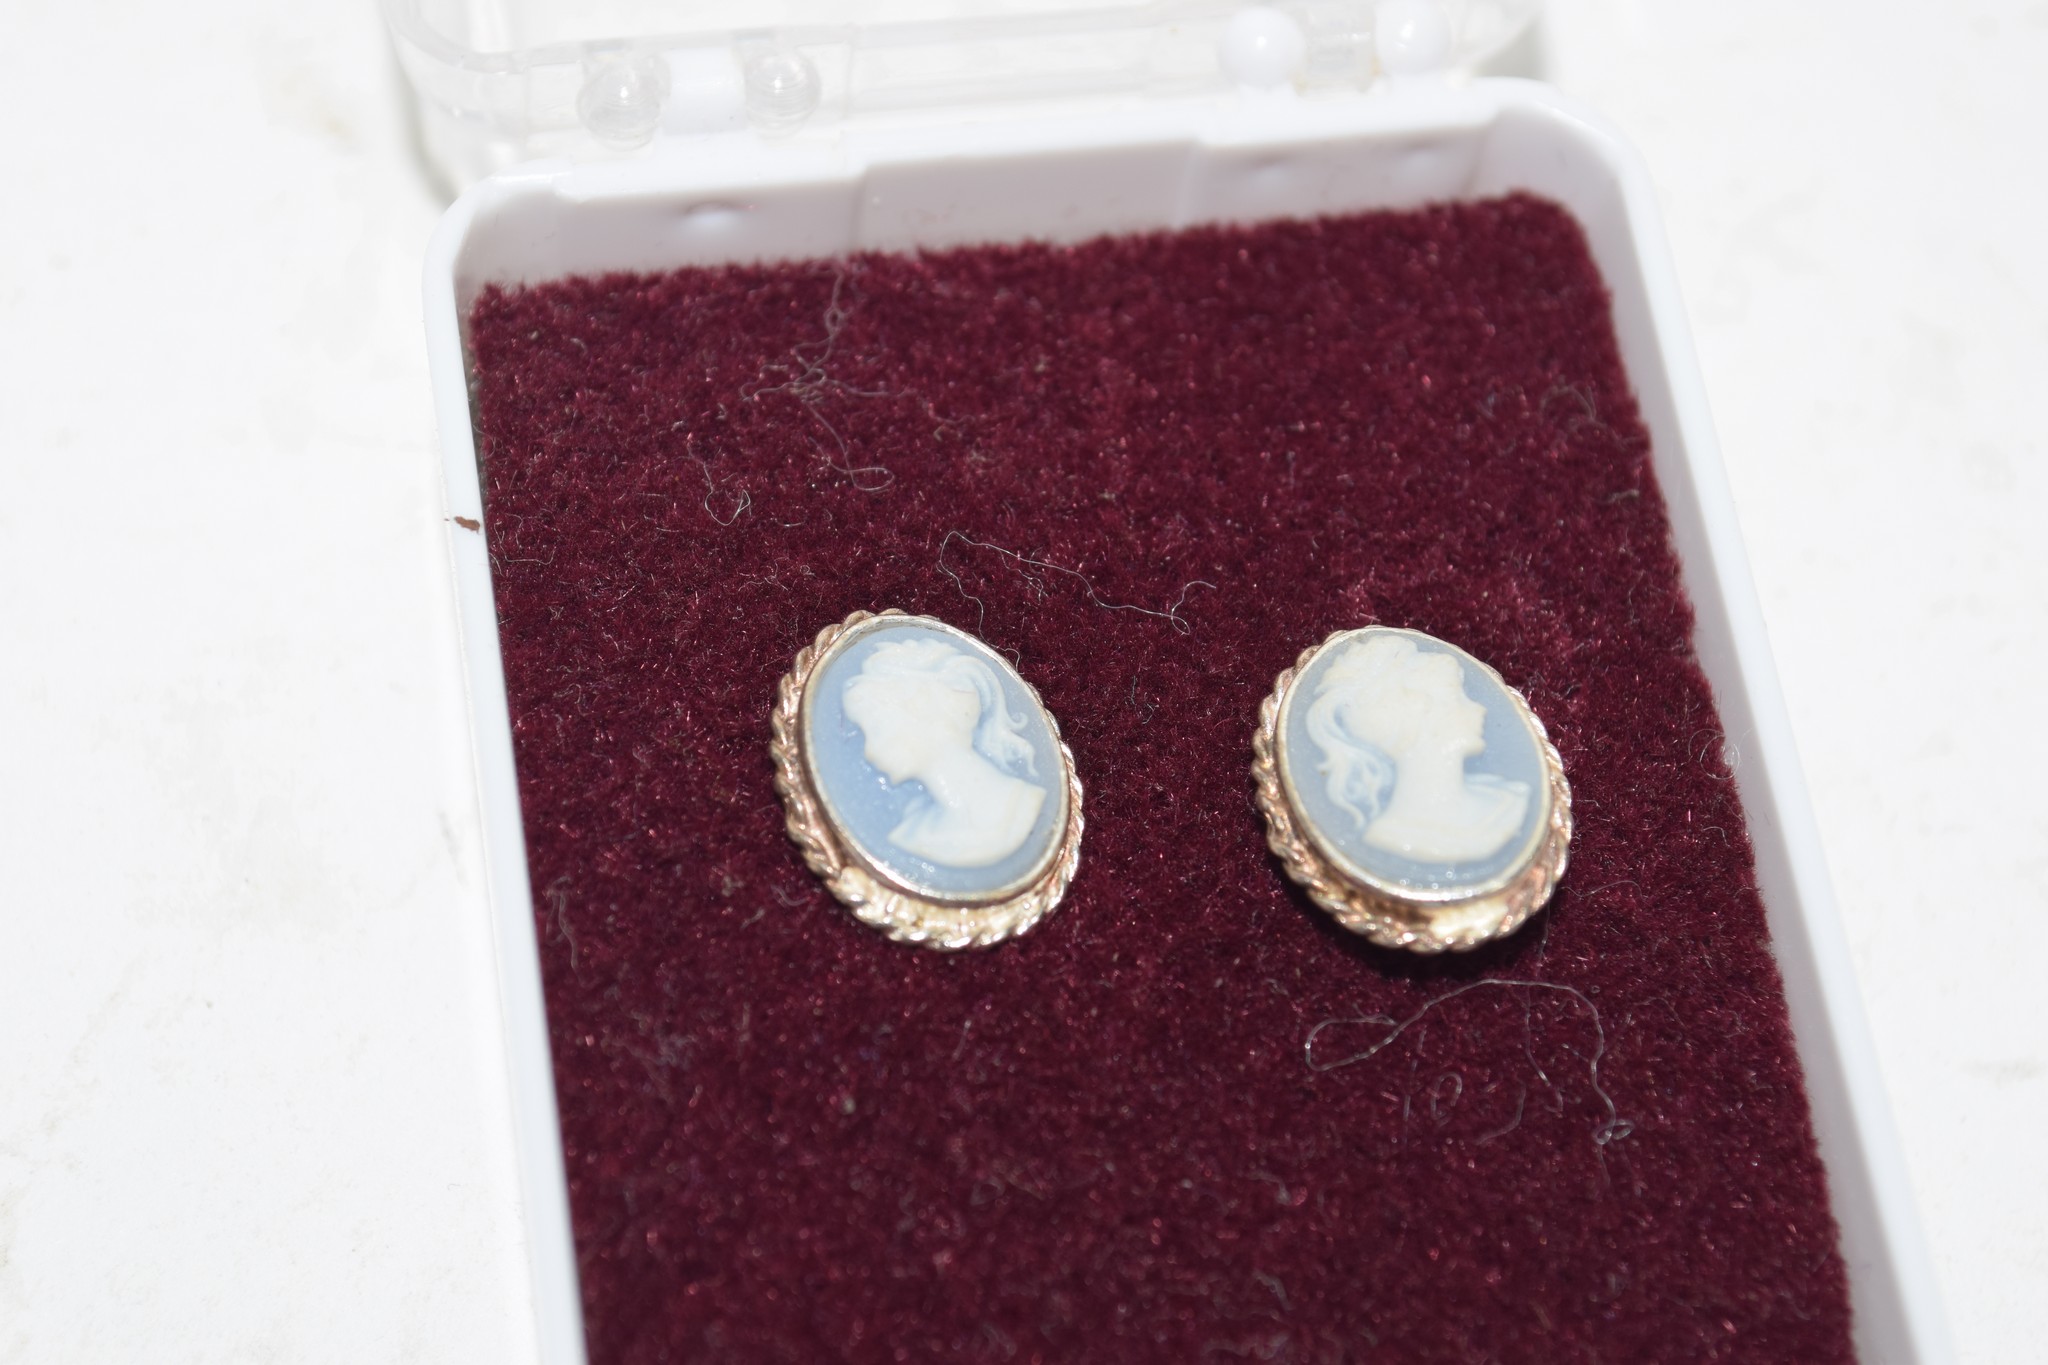 PLASTIC BOX CONTAINING PAIR OF EARRINGS WITH CAMEO STYLE DECORATION - Image 2 of 2